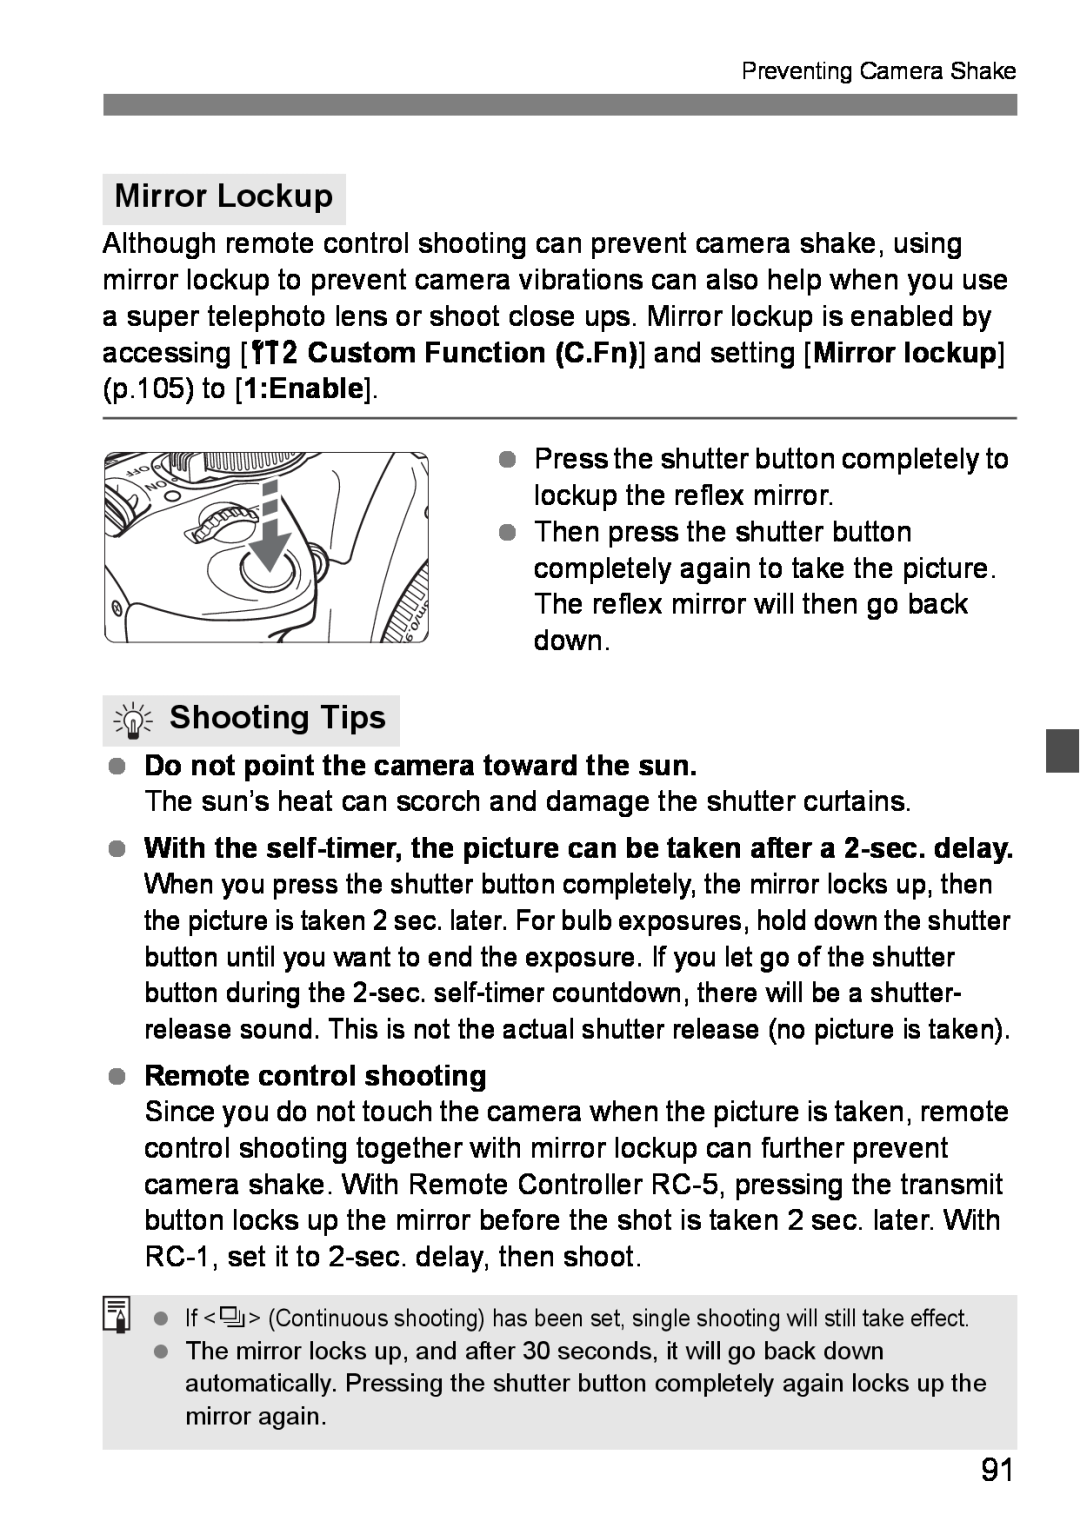 Canon EOS DIGITAL REBEL XTI Mirror Lockup, Shooting Tips, Do not point the camera toward the sun, Remote control shooting 